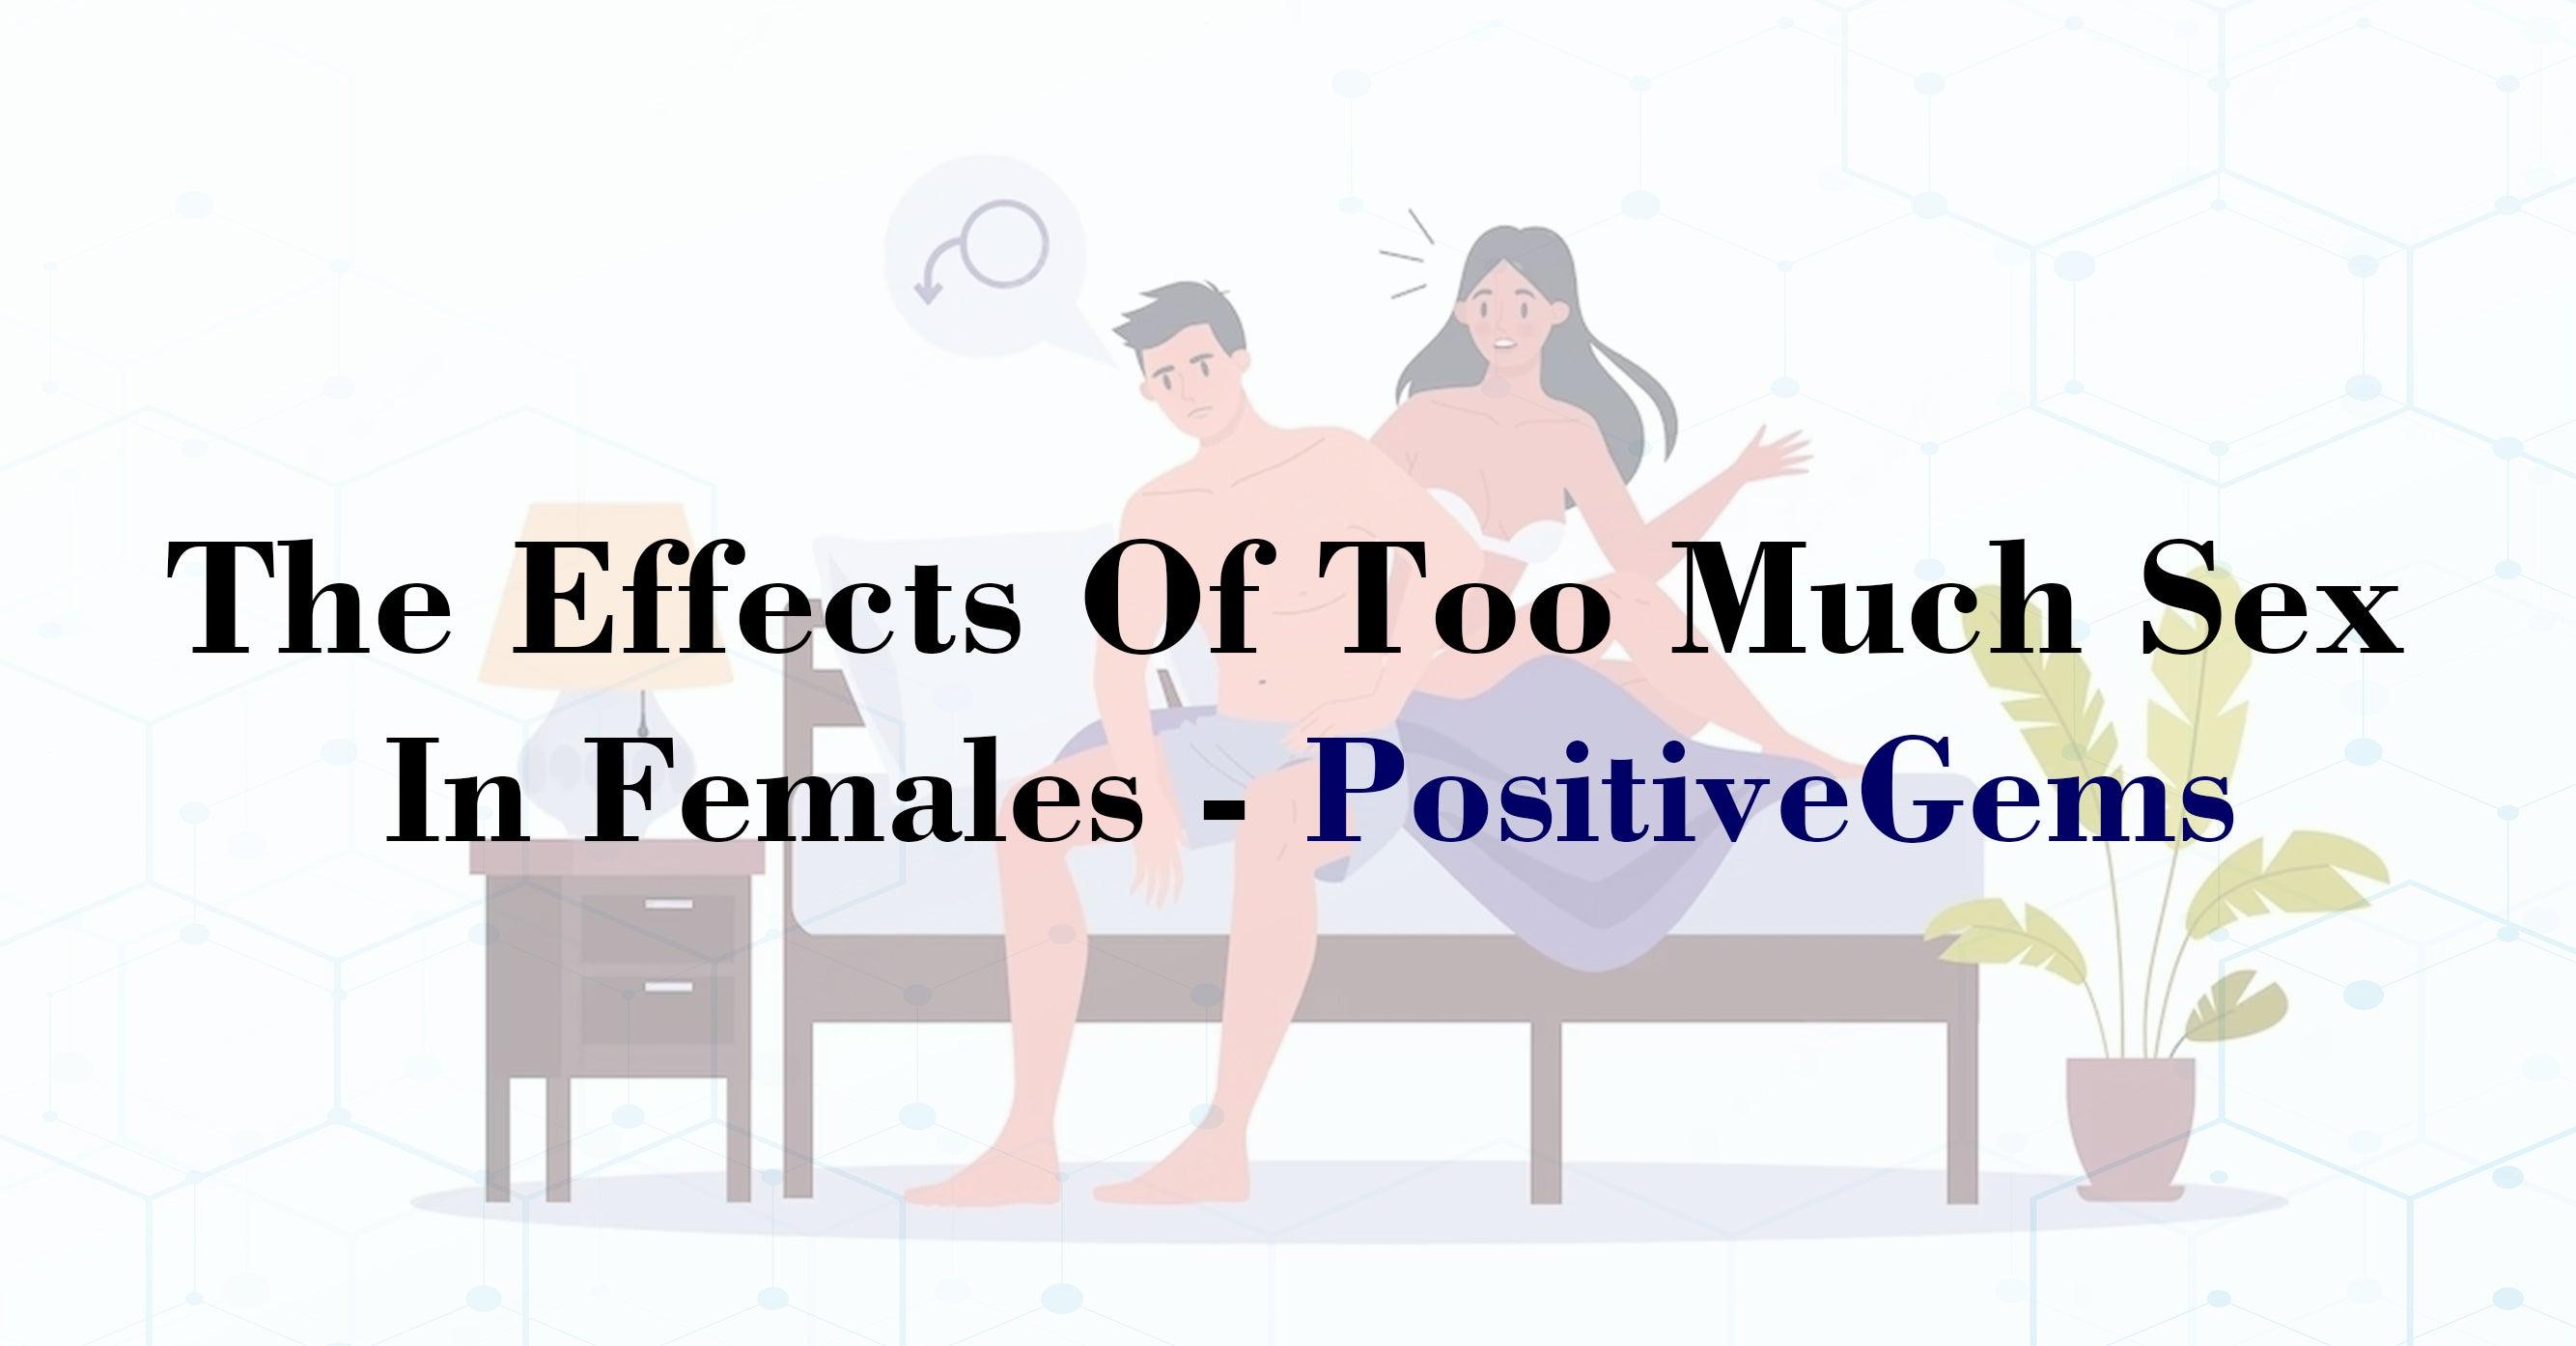 The Effects of too much sex in Females